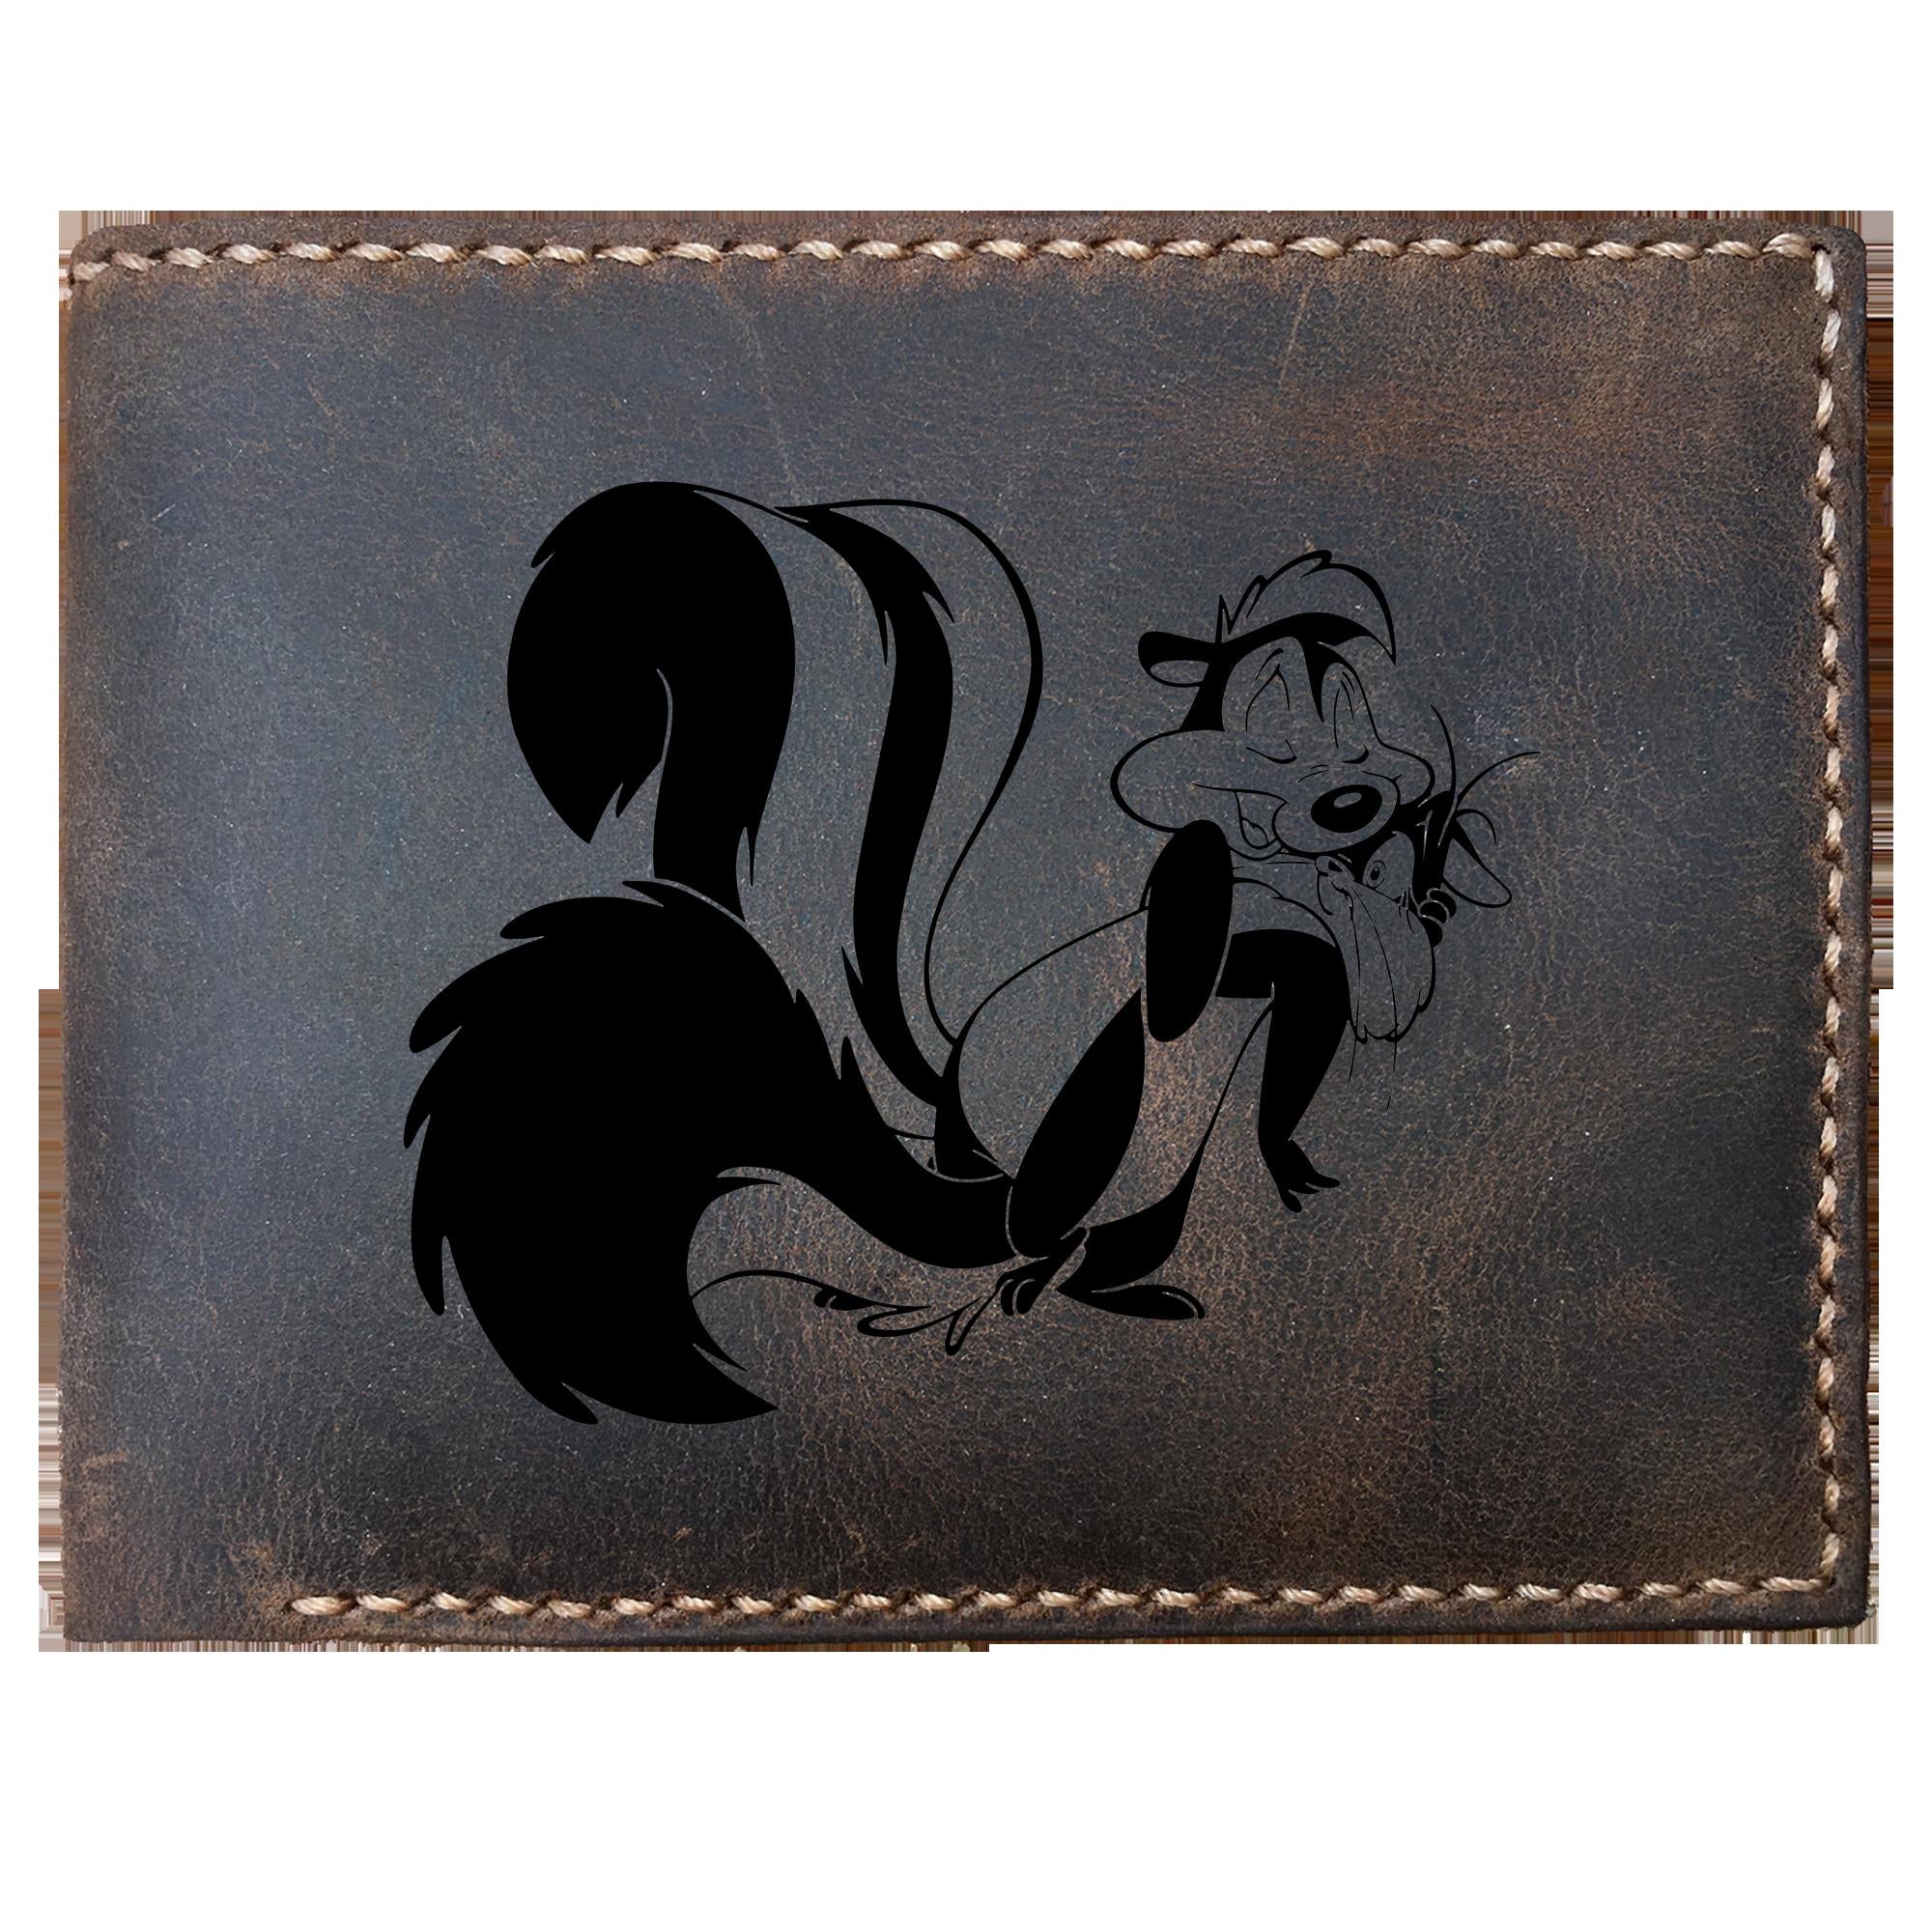 Skitongifts Funny Custom Laser Engraved Bifold Leather Wallet, Pepele Pew And Penelope Squirrel Classic Funny Best Or Souvenir Birthday